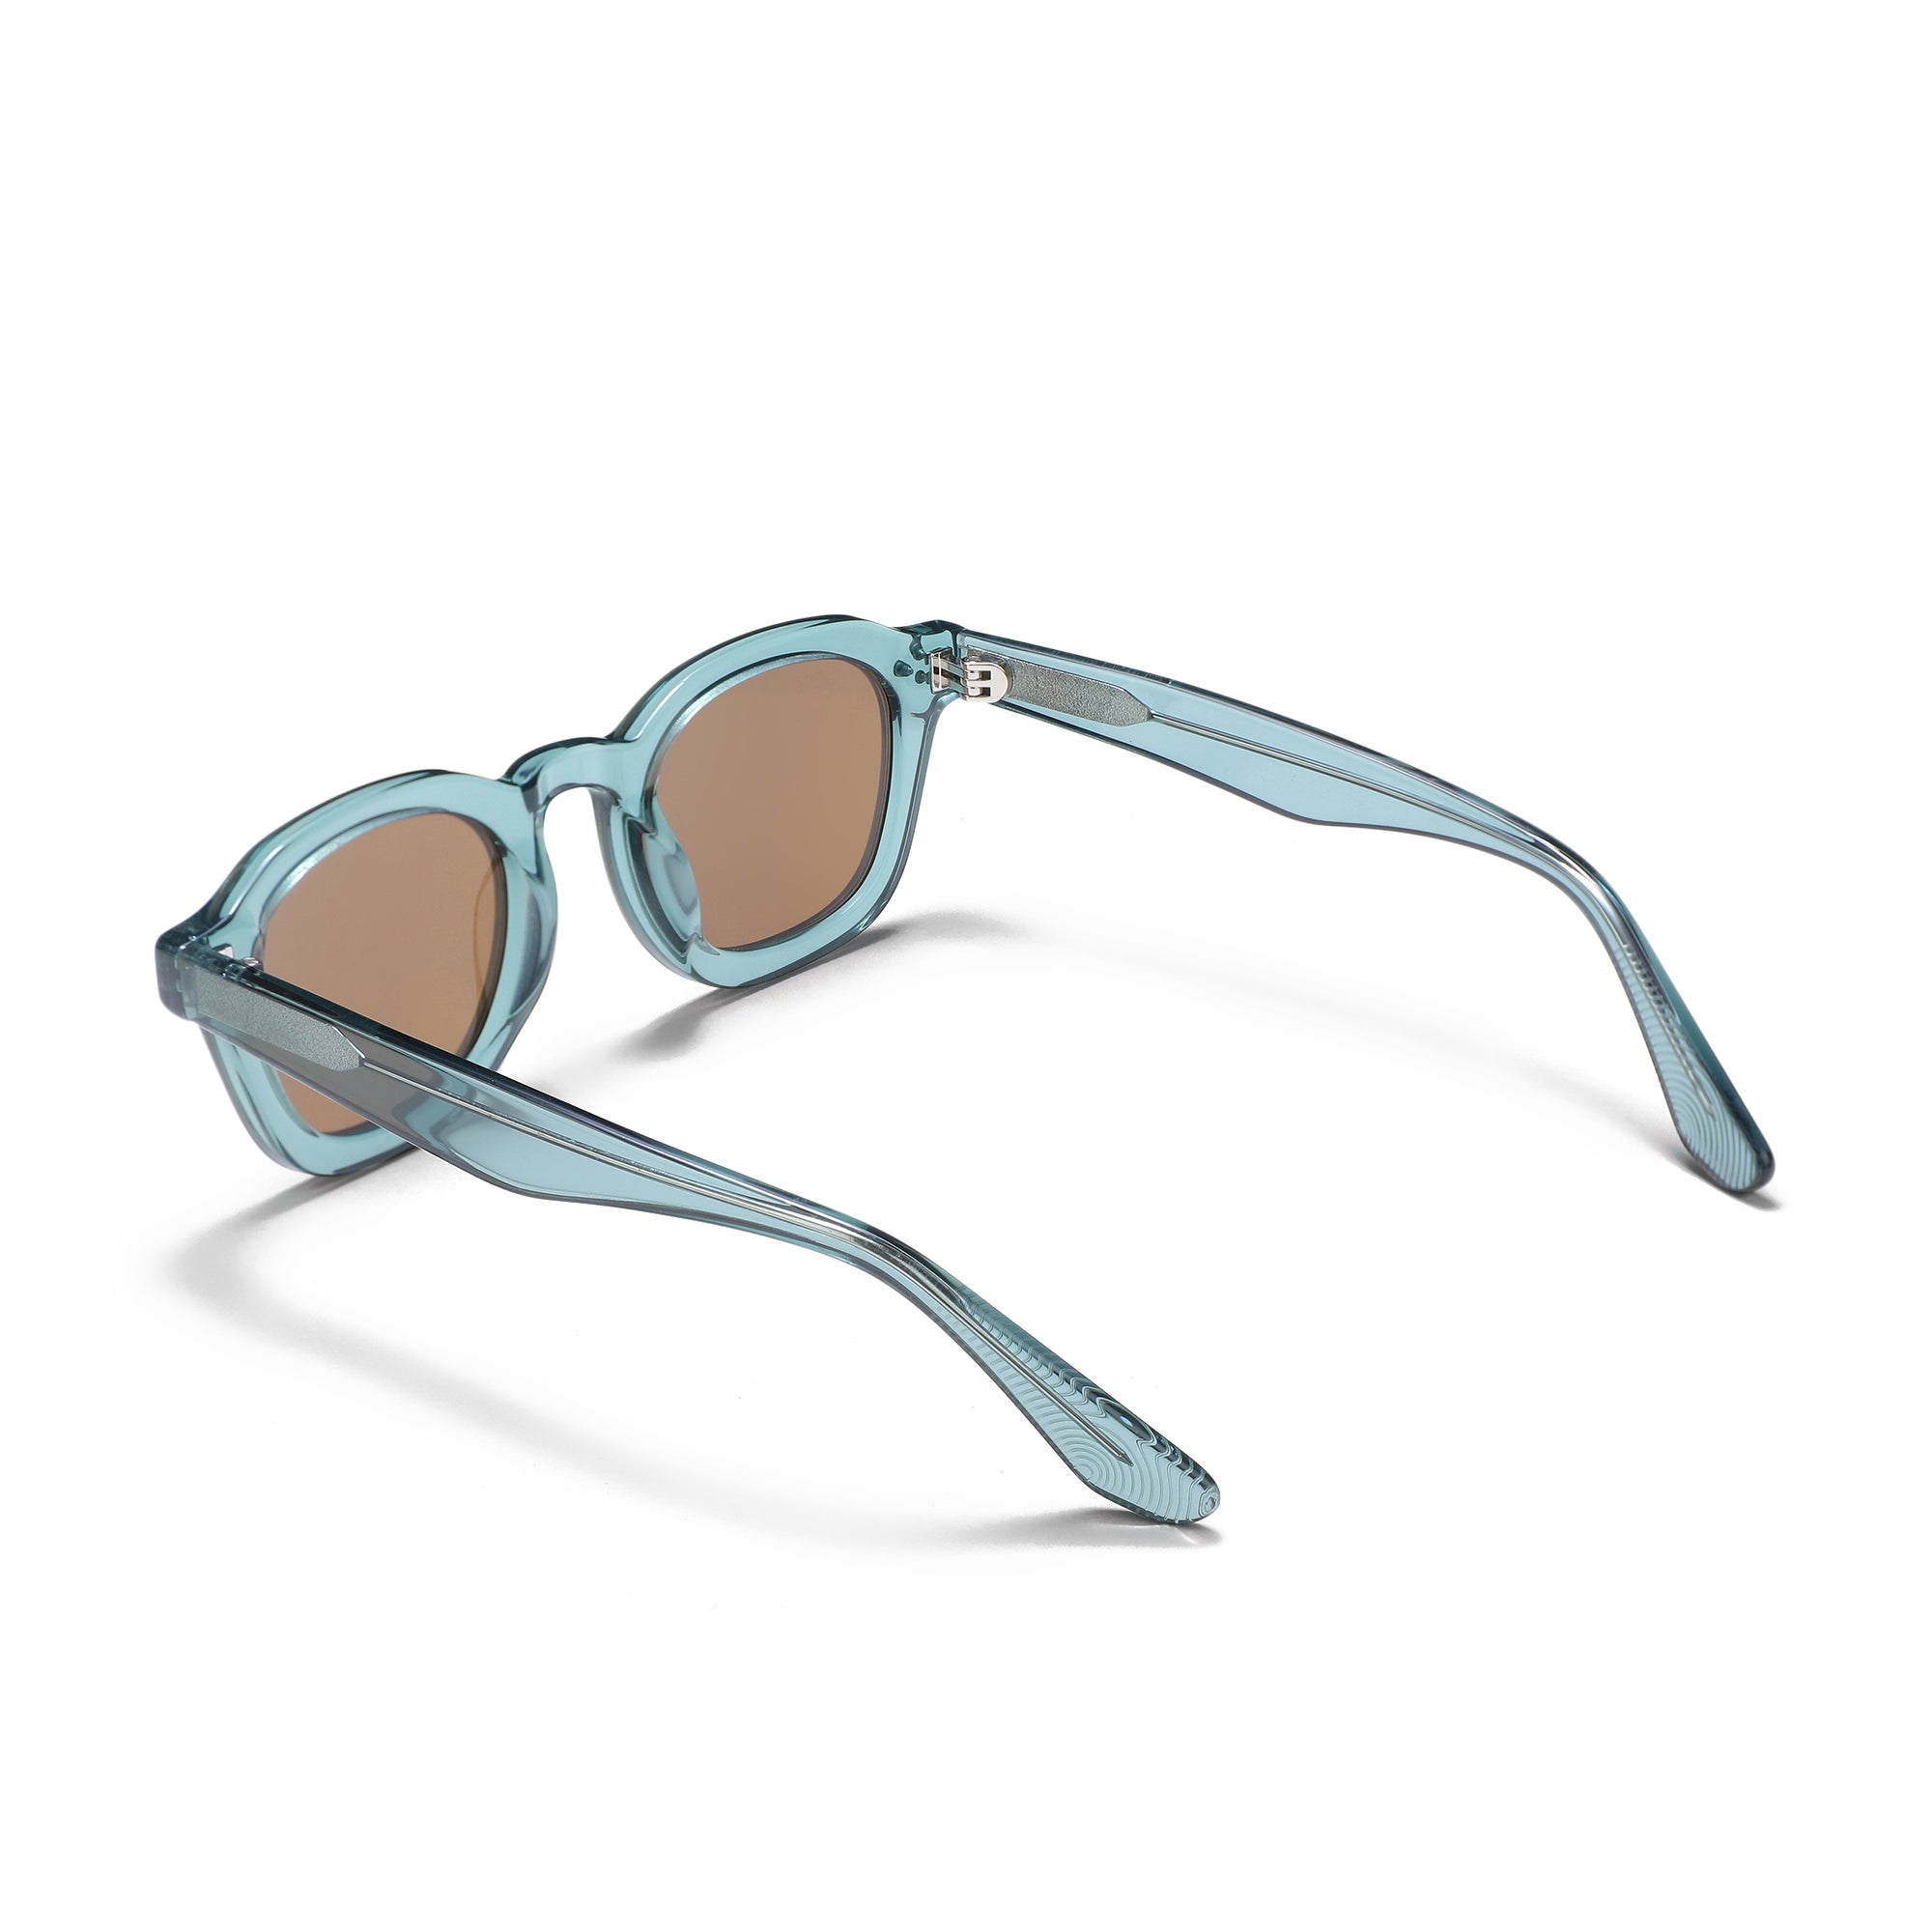 Shady Rays DeepSea Collection: Sunglasses Fighting Hunger